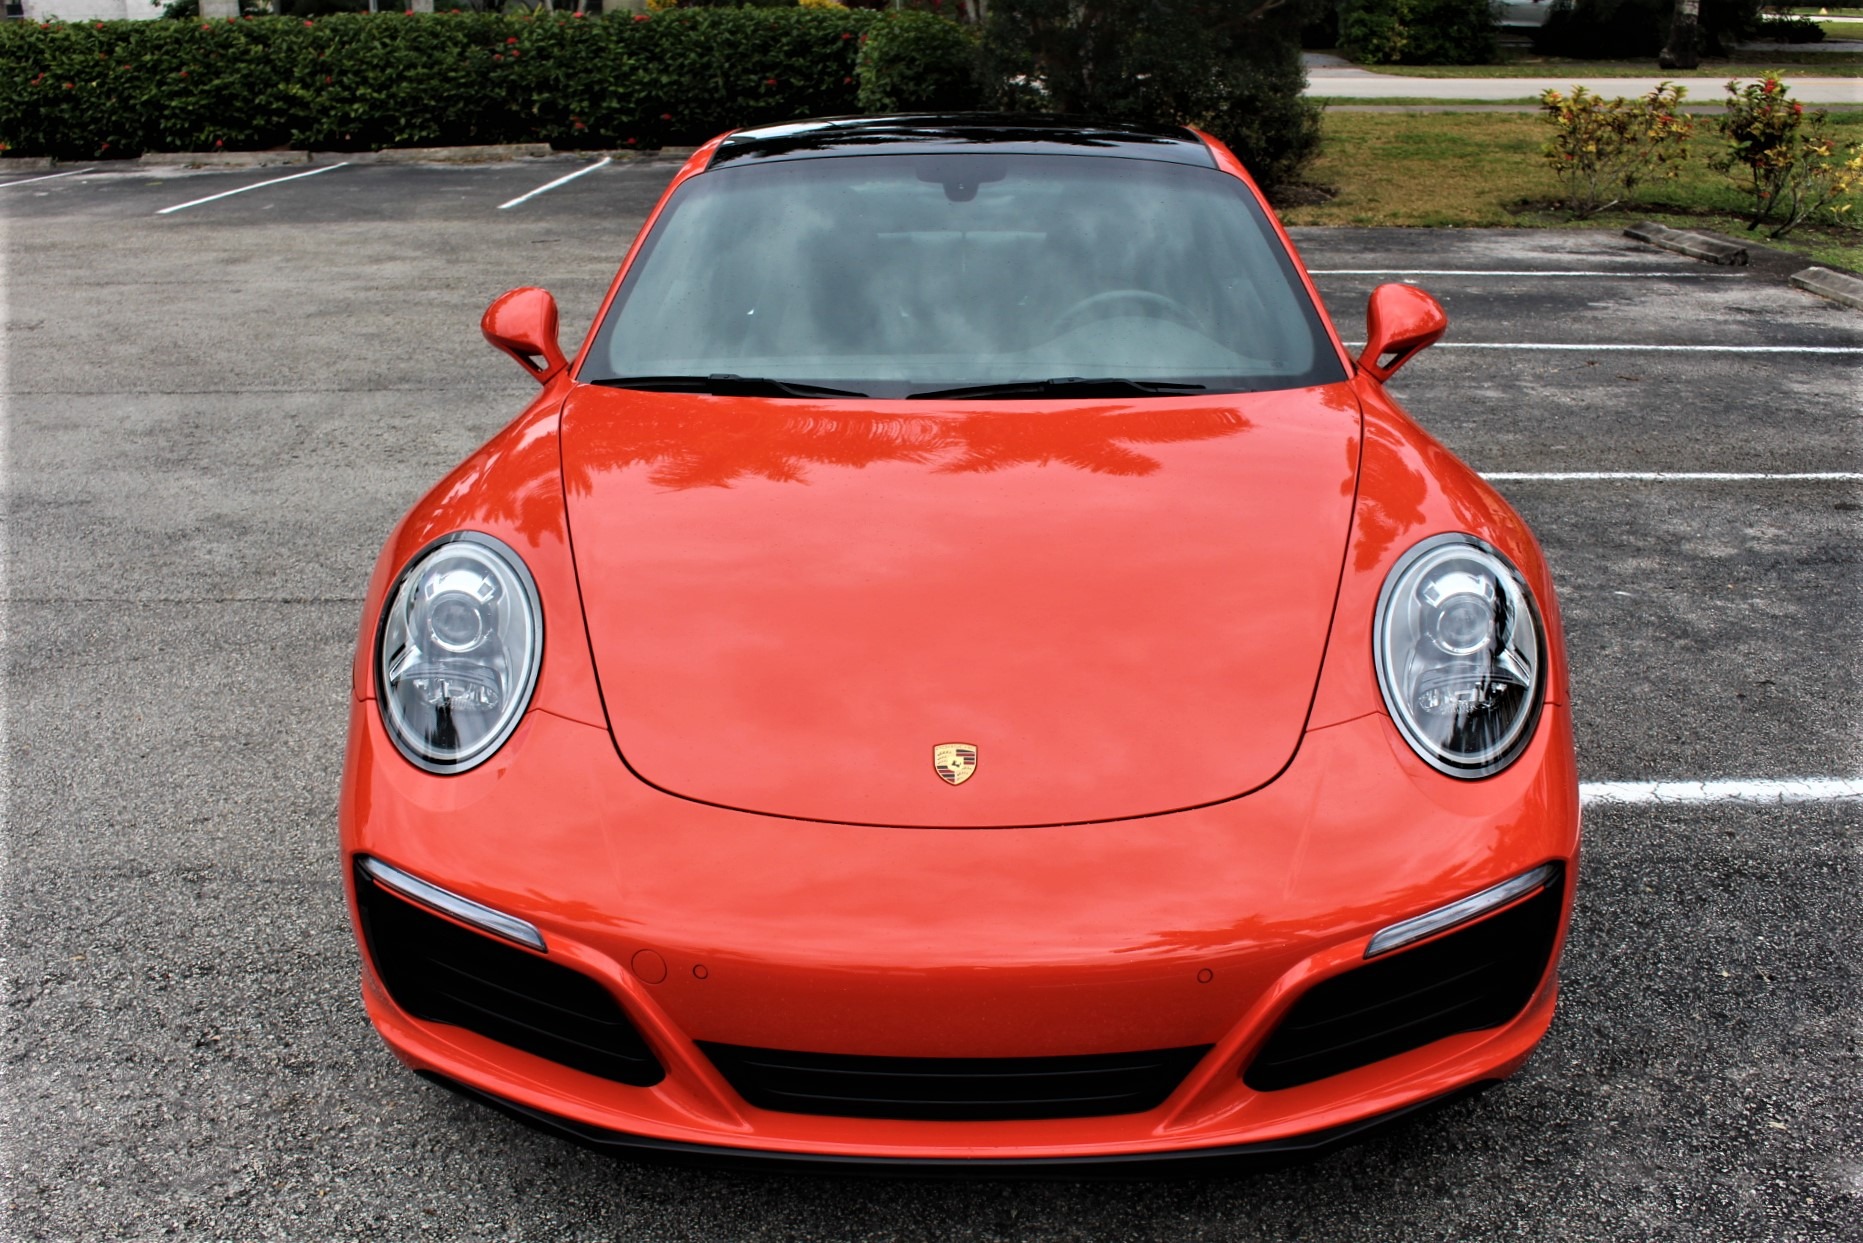 Used 2017 Porsche 911 Carrera for sale Sold at The Gables Sports Cars in Miami FL 33146 4